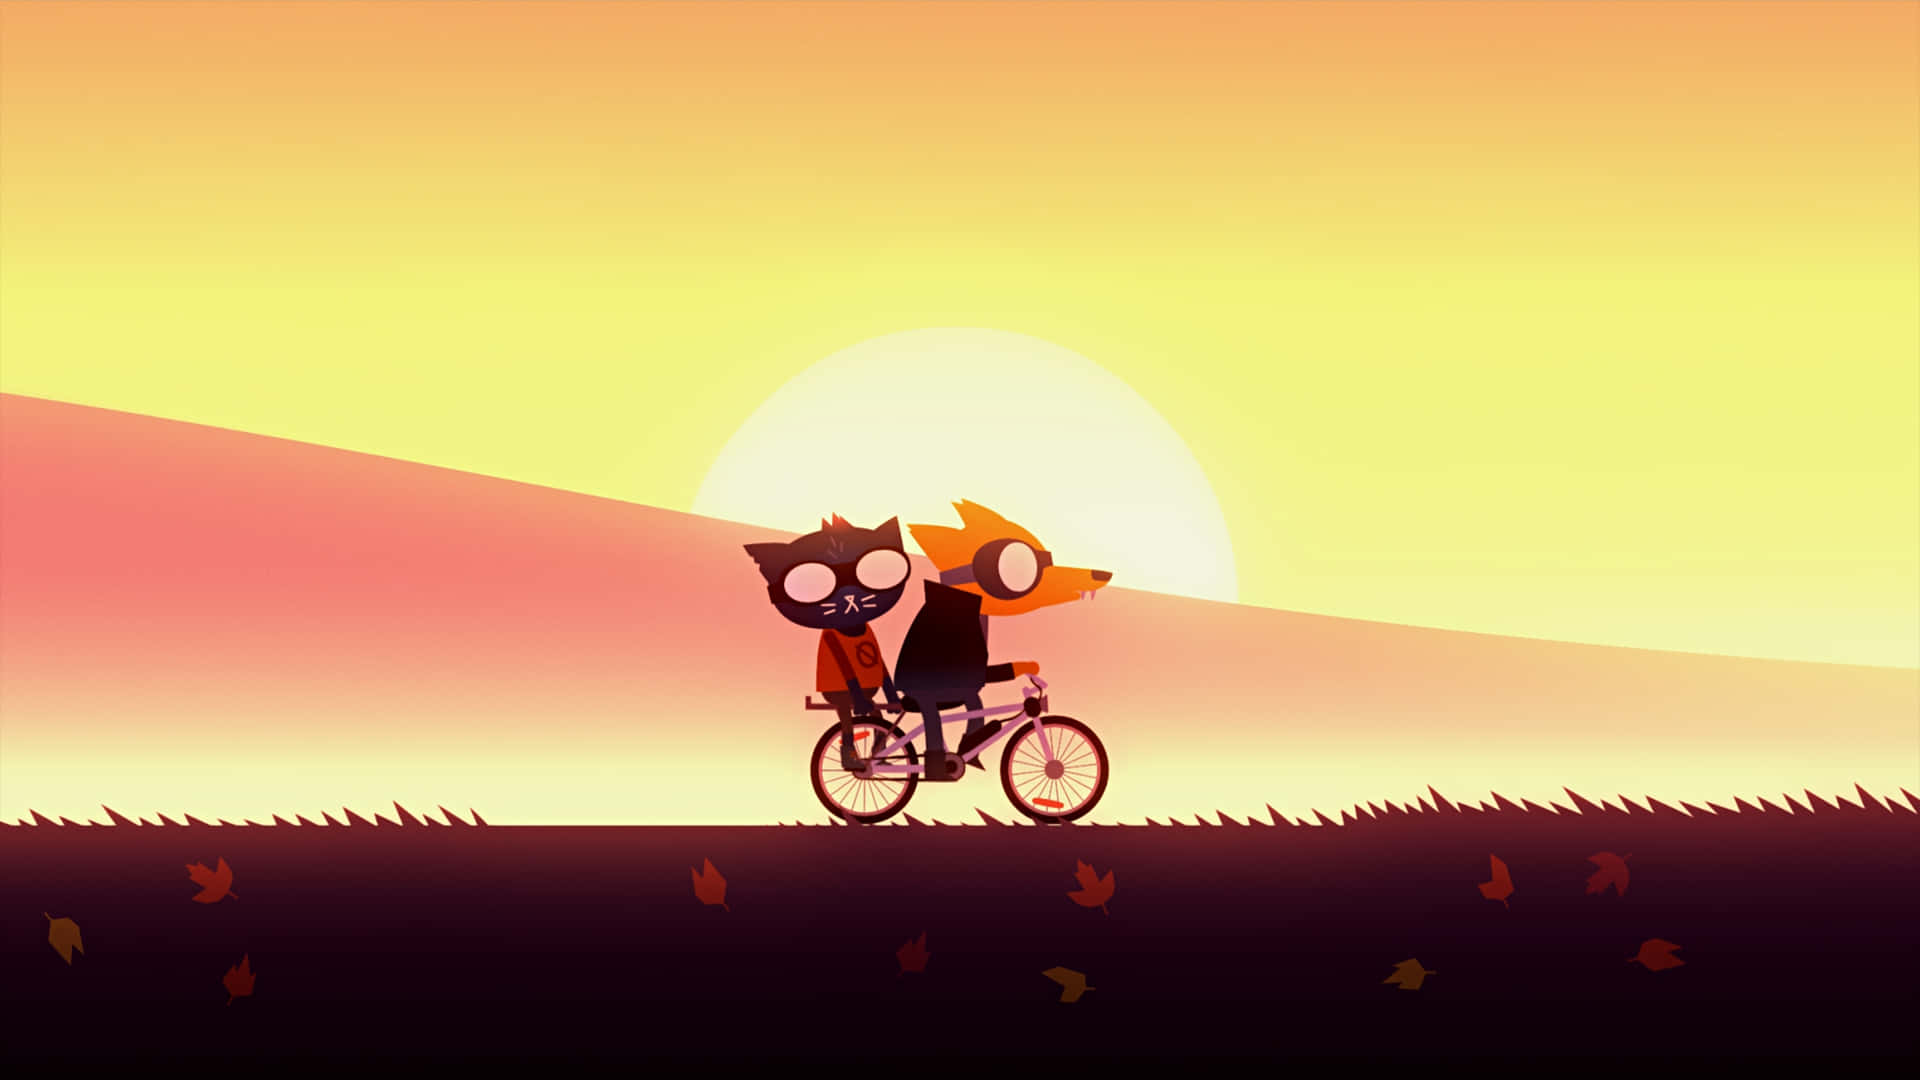 A Couple Riding Bikes In The Sunset Wallpaper